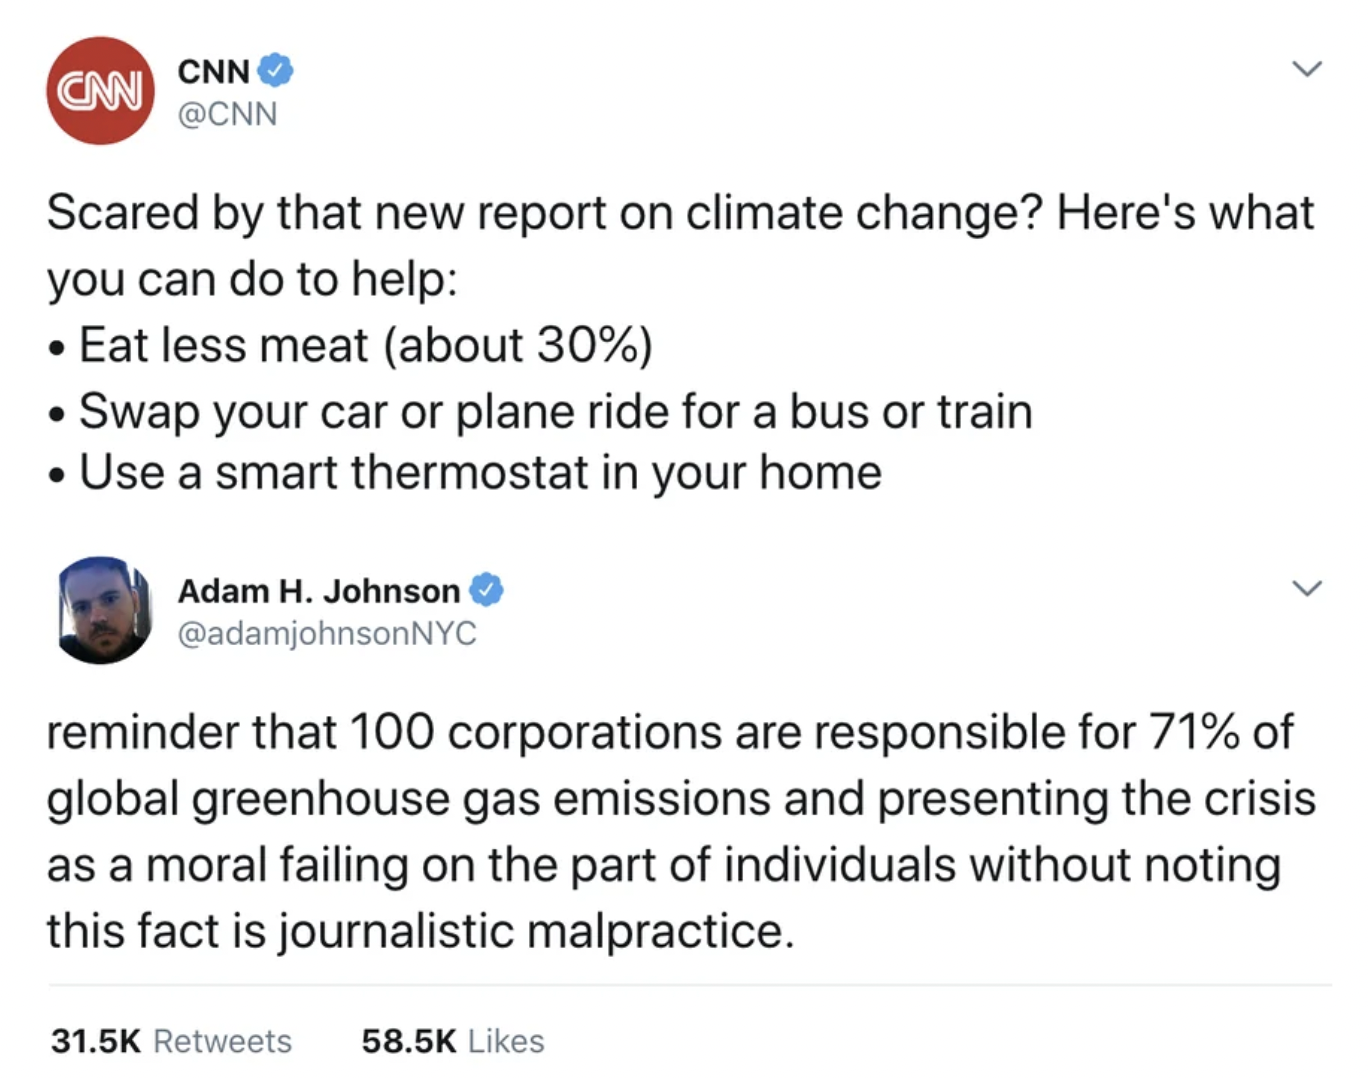 document - Can Cnn Scared by that new report on climate change? Here's what you can do to help Eat less meat about 30% Swap your car or plane ride for a bus or train Use a smart thermostat in your home Adam H. Johnson reminder that 100 corporations are re